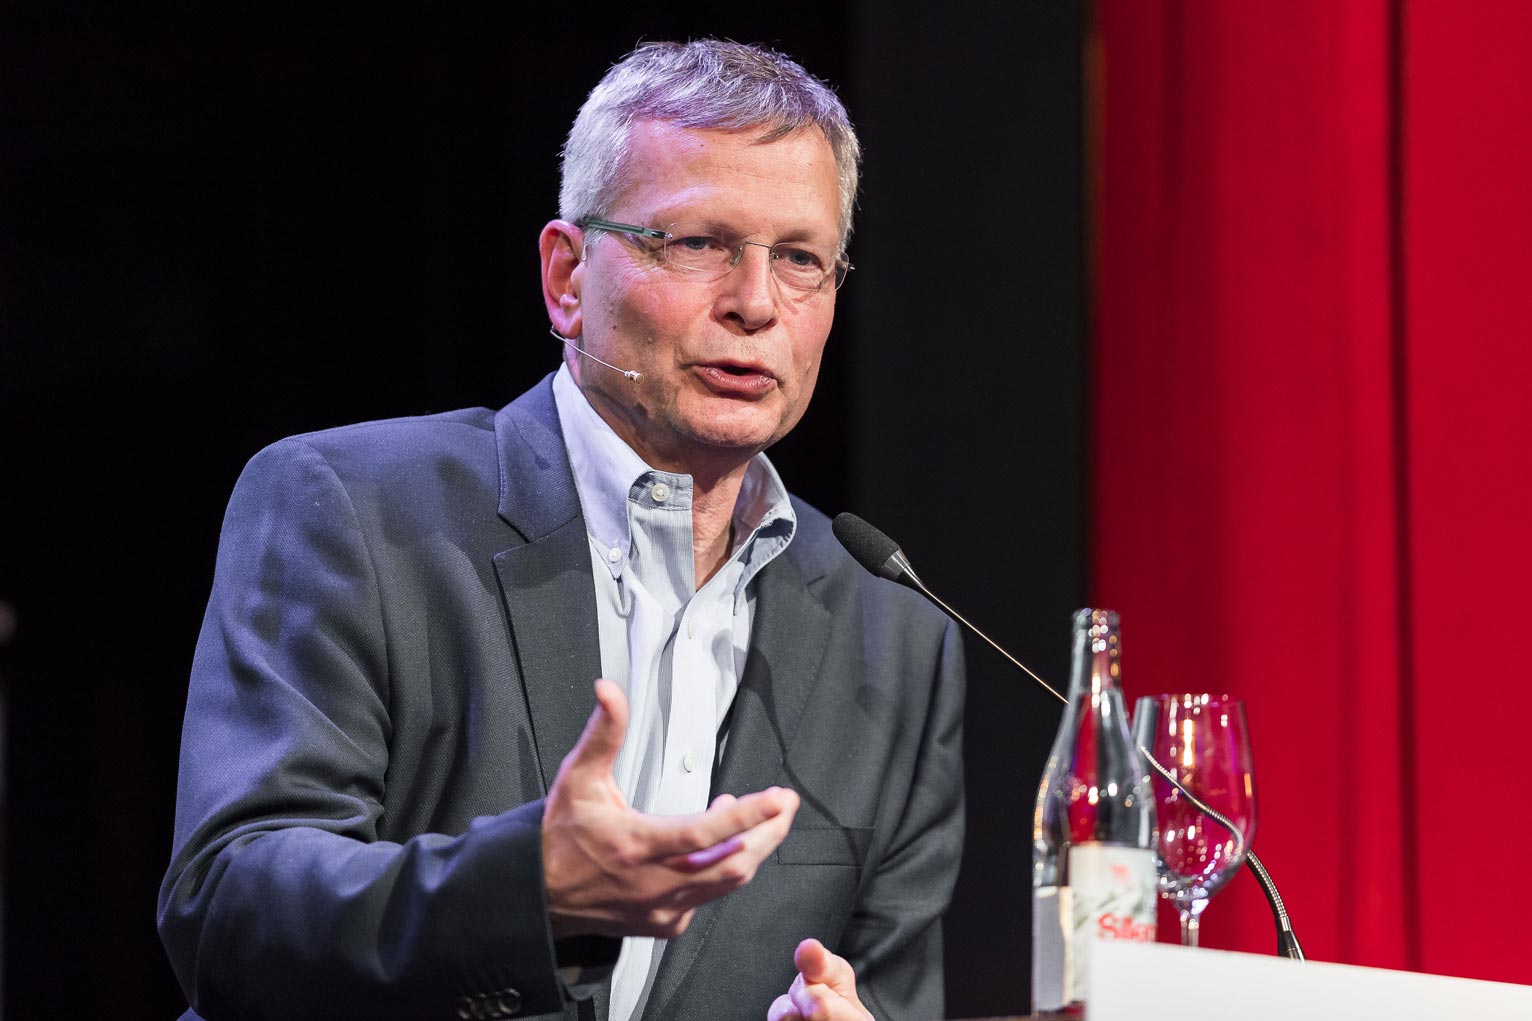 Dani Rodrik (Harvard University) advocated for a fairer, more sustainable globalization.